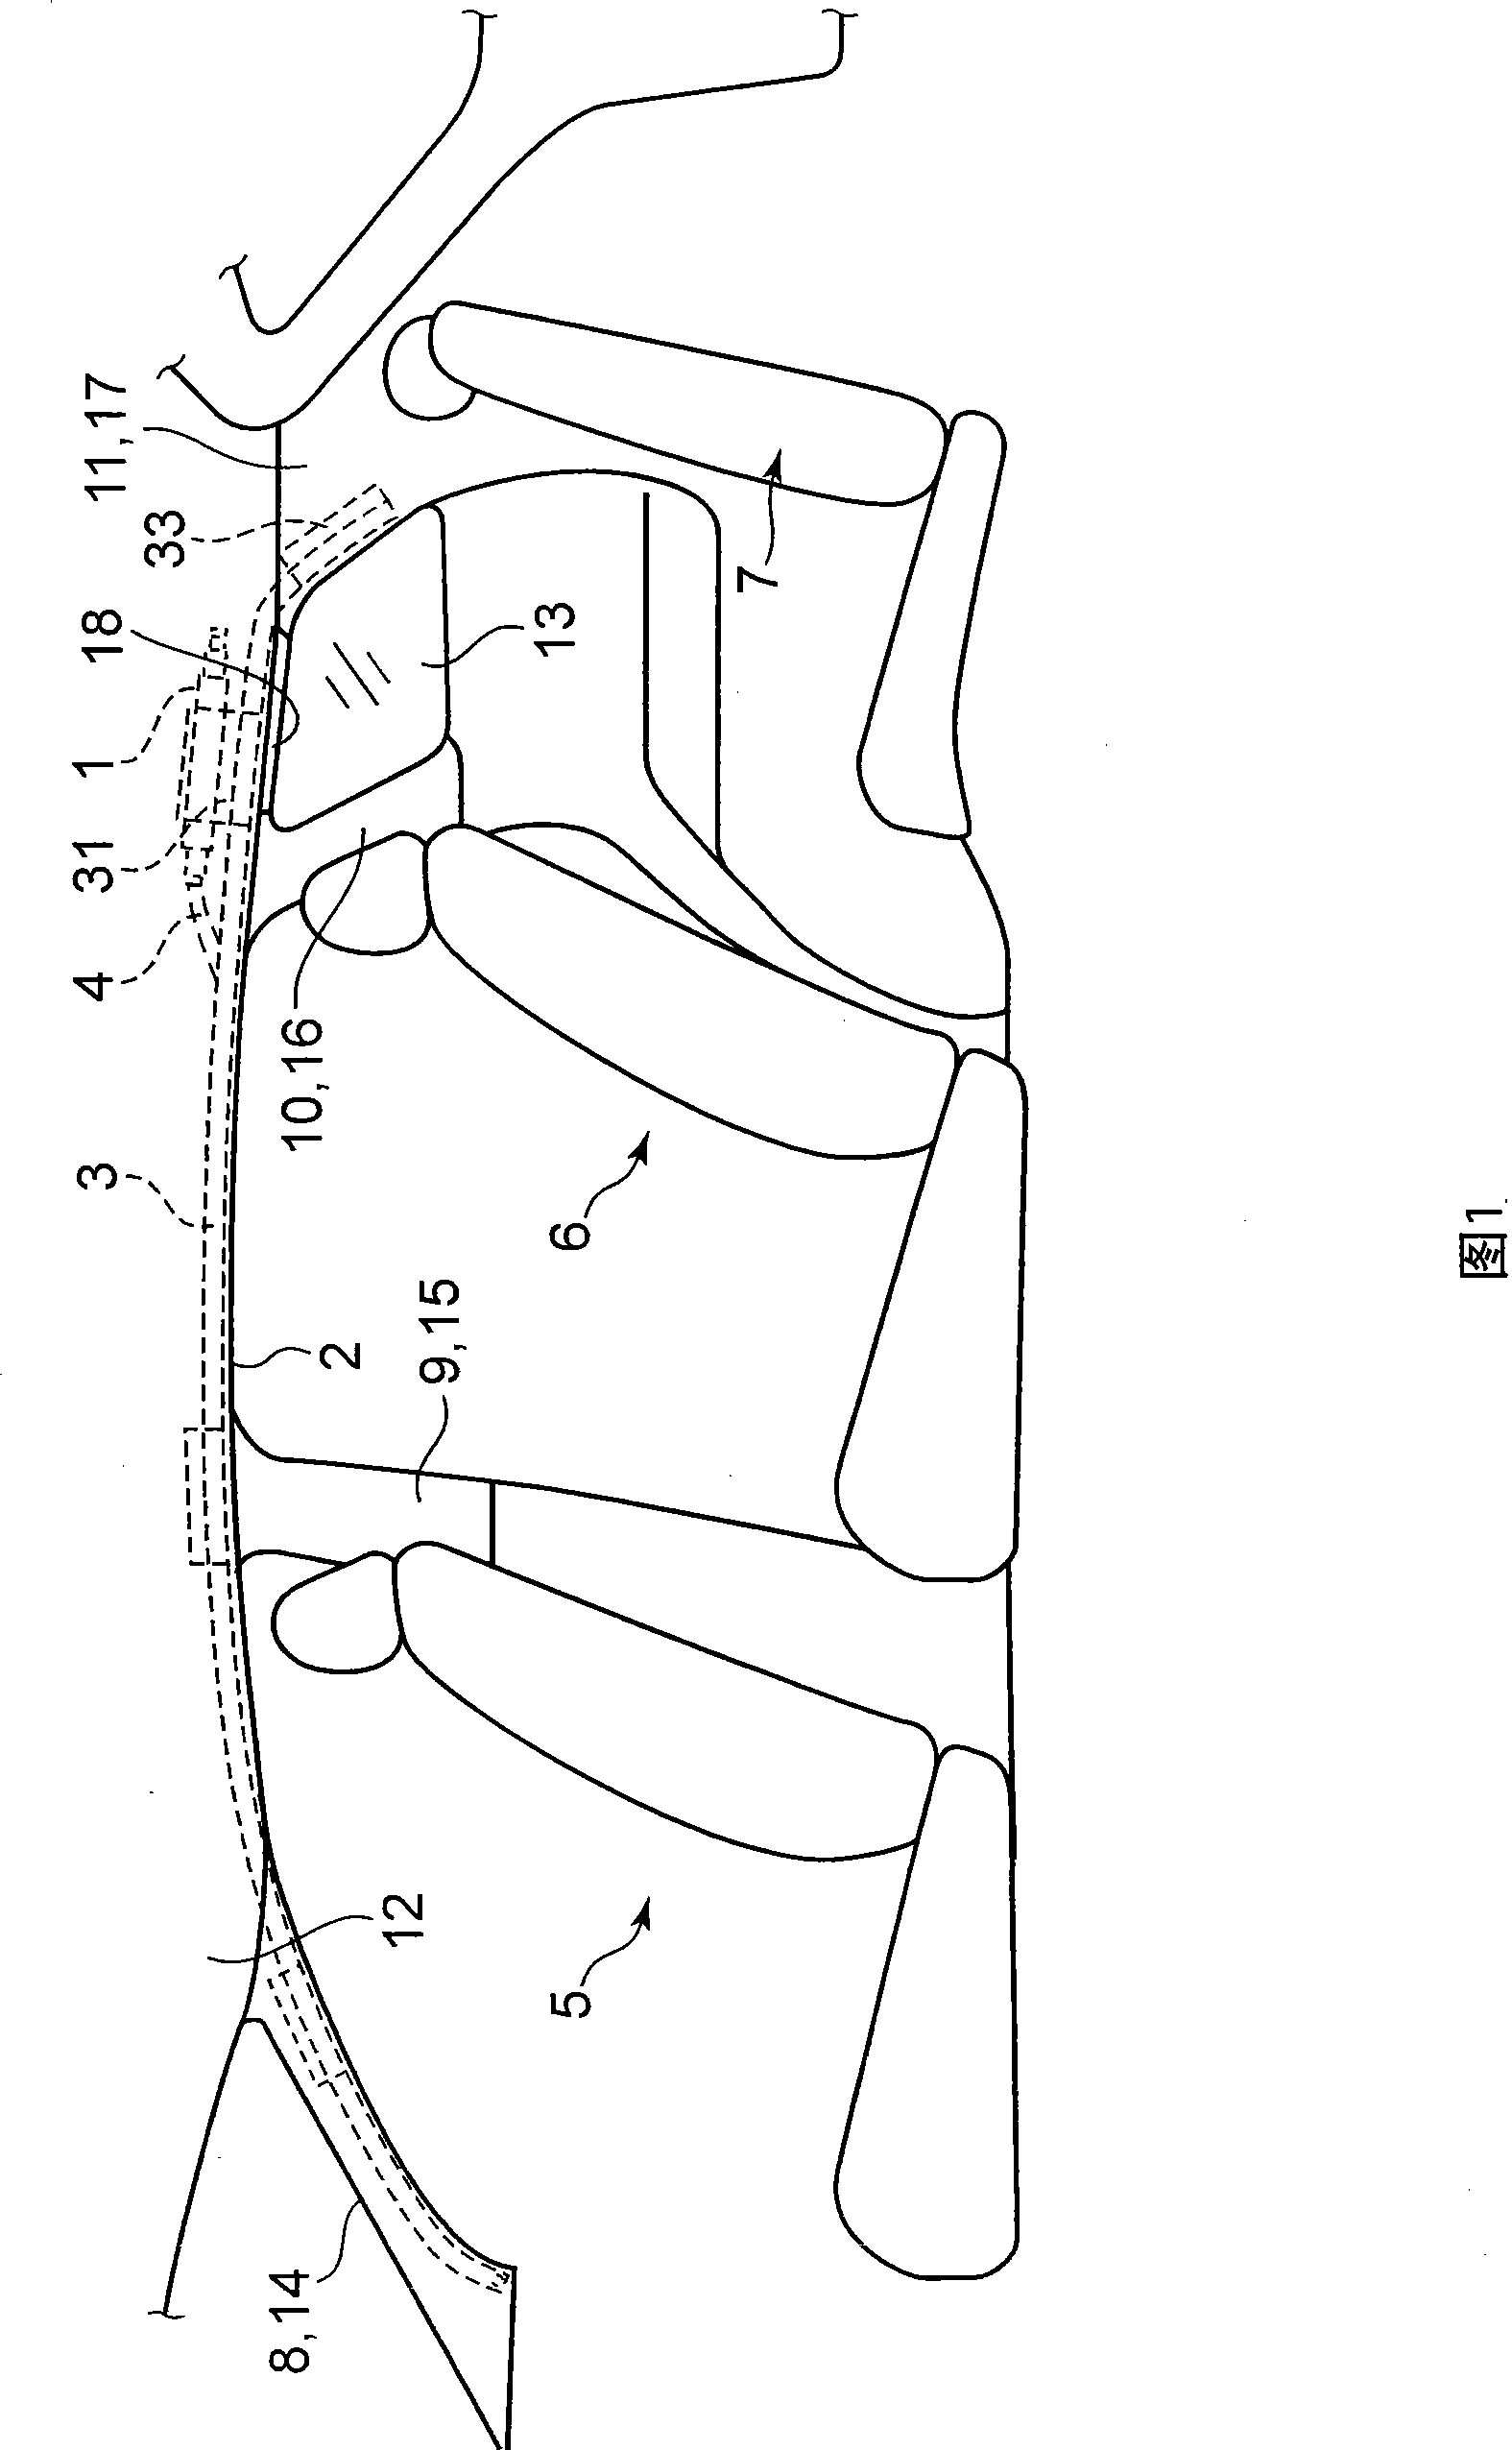 Vehicle rear structure provided with curtain air bag device